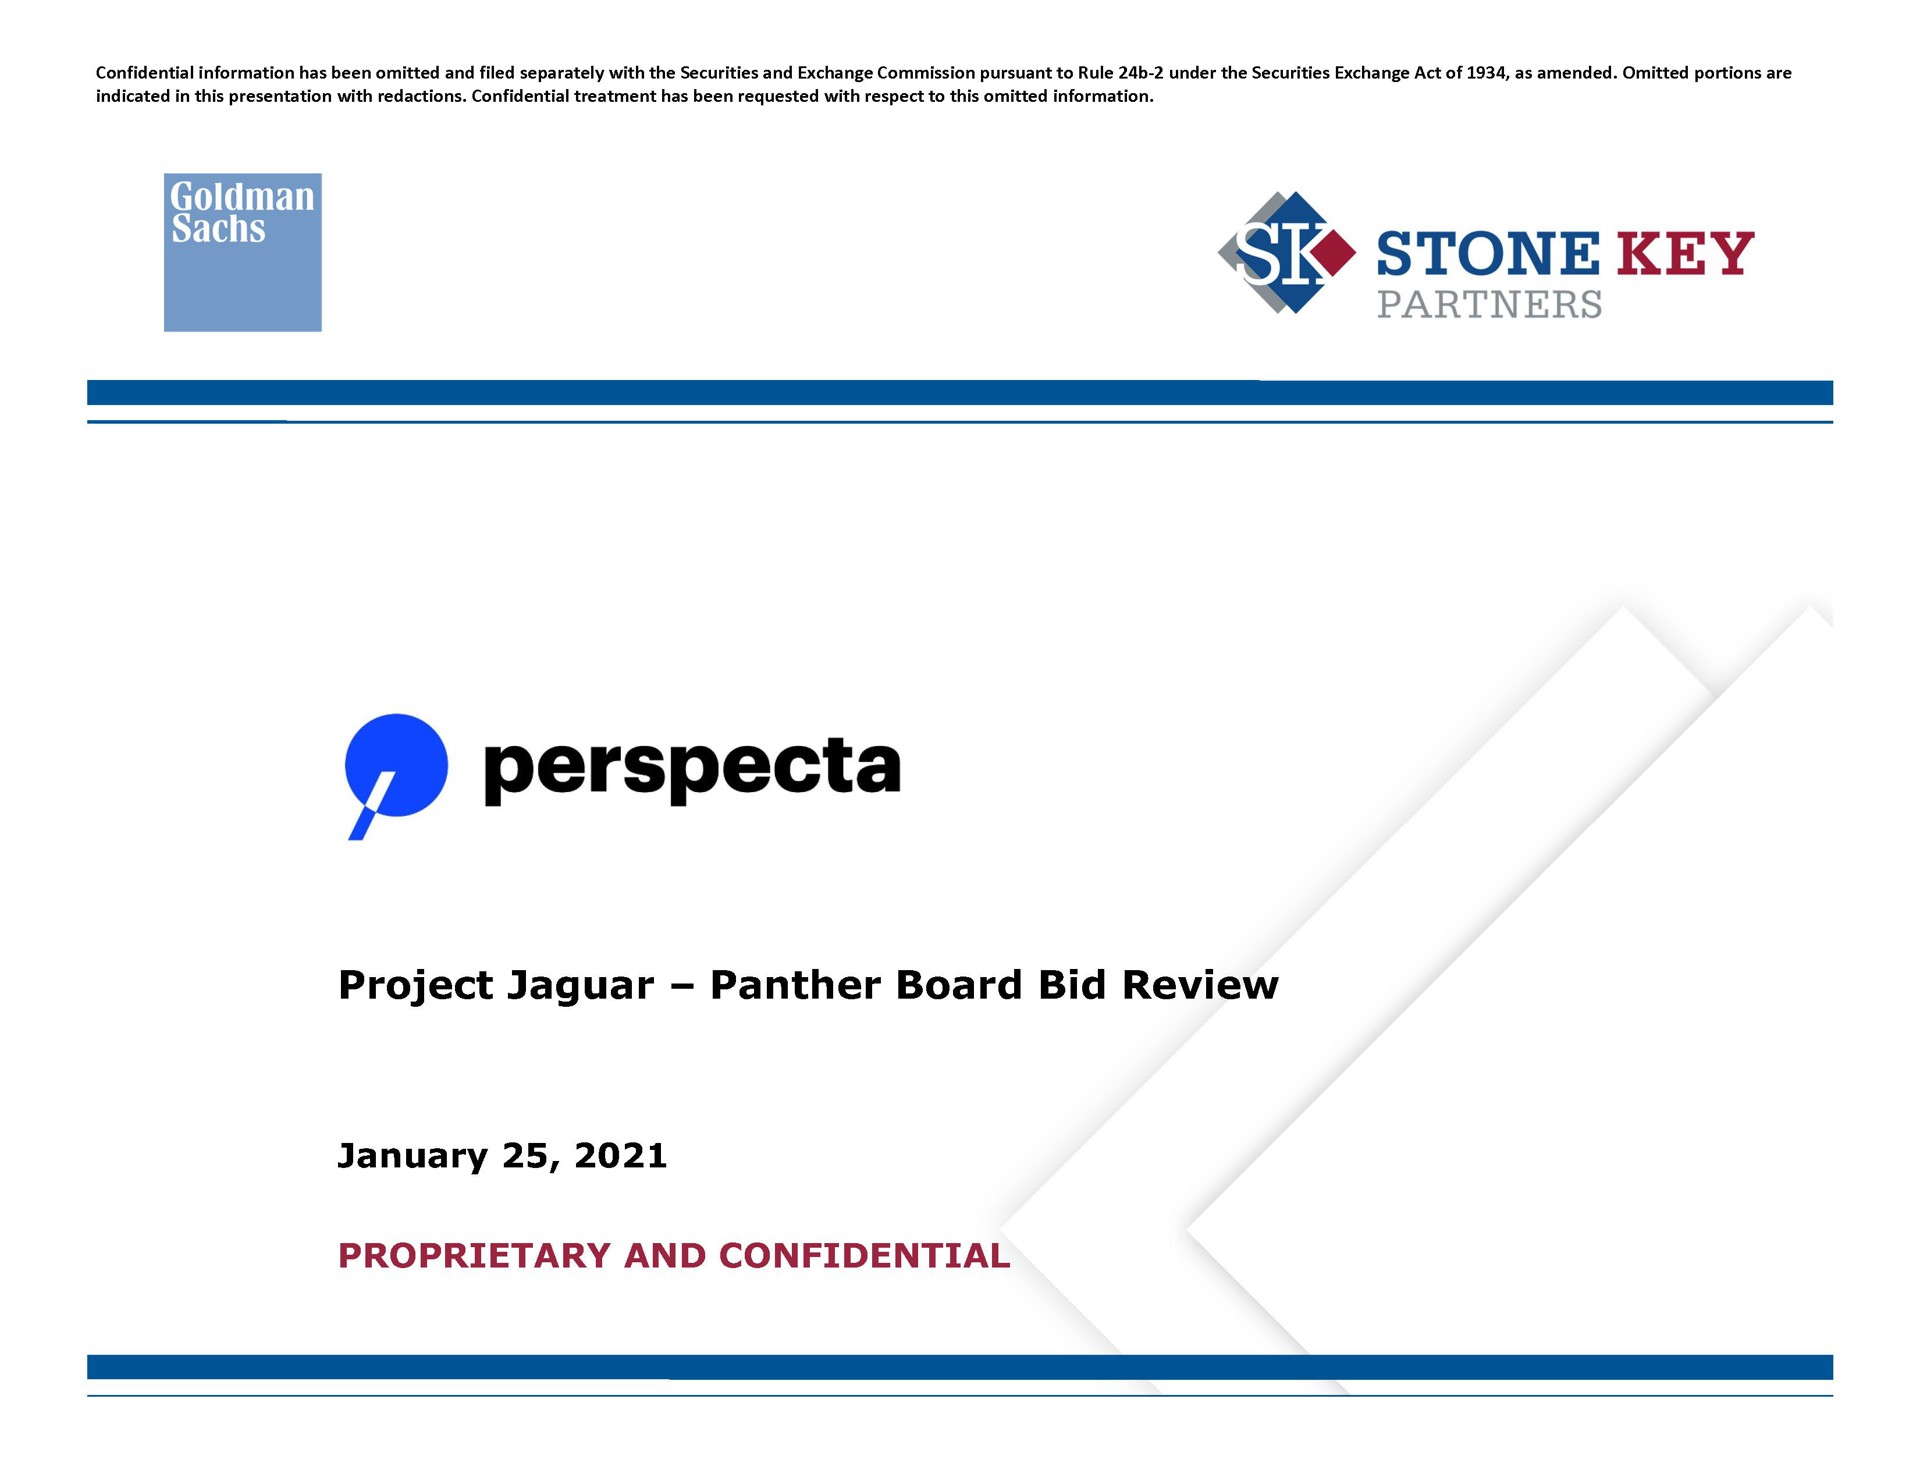 tent stone key partners project jaguar panther board bid review proprietary and confidential | Goldman Sachs